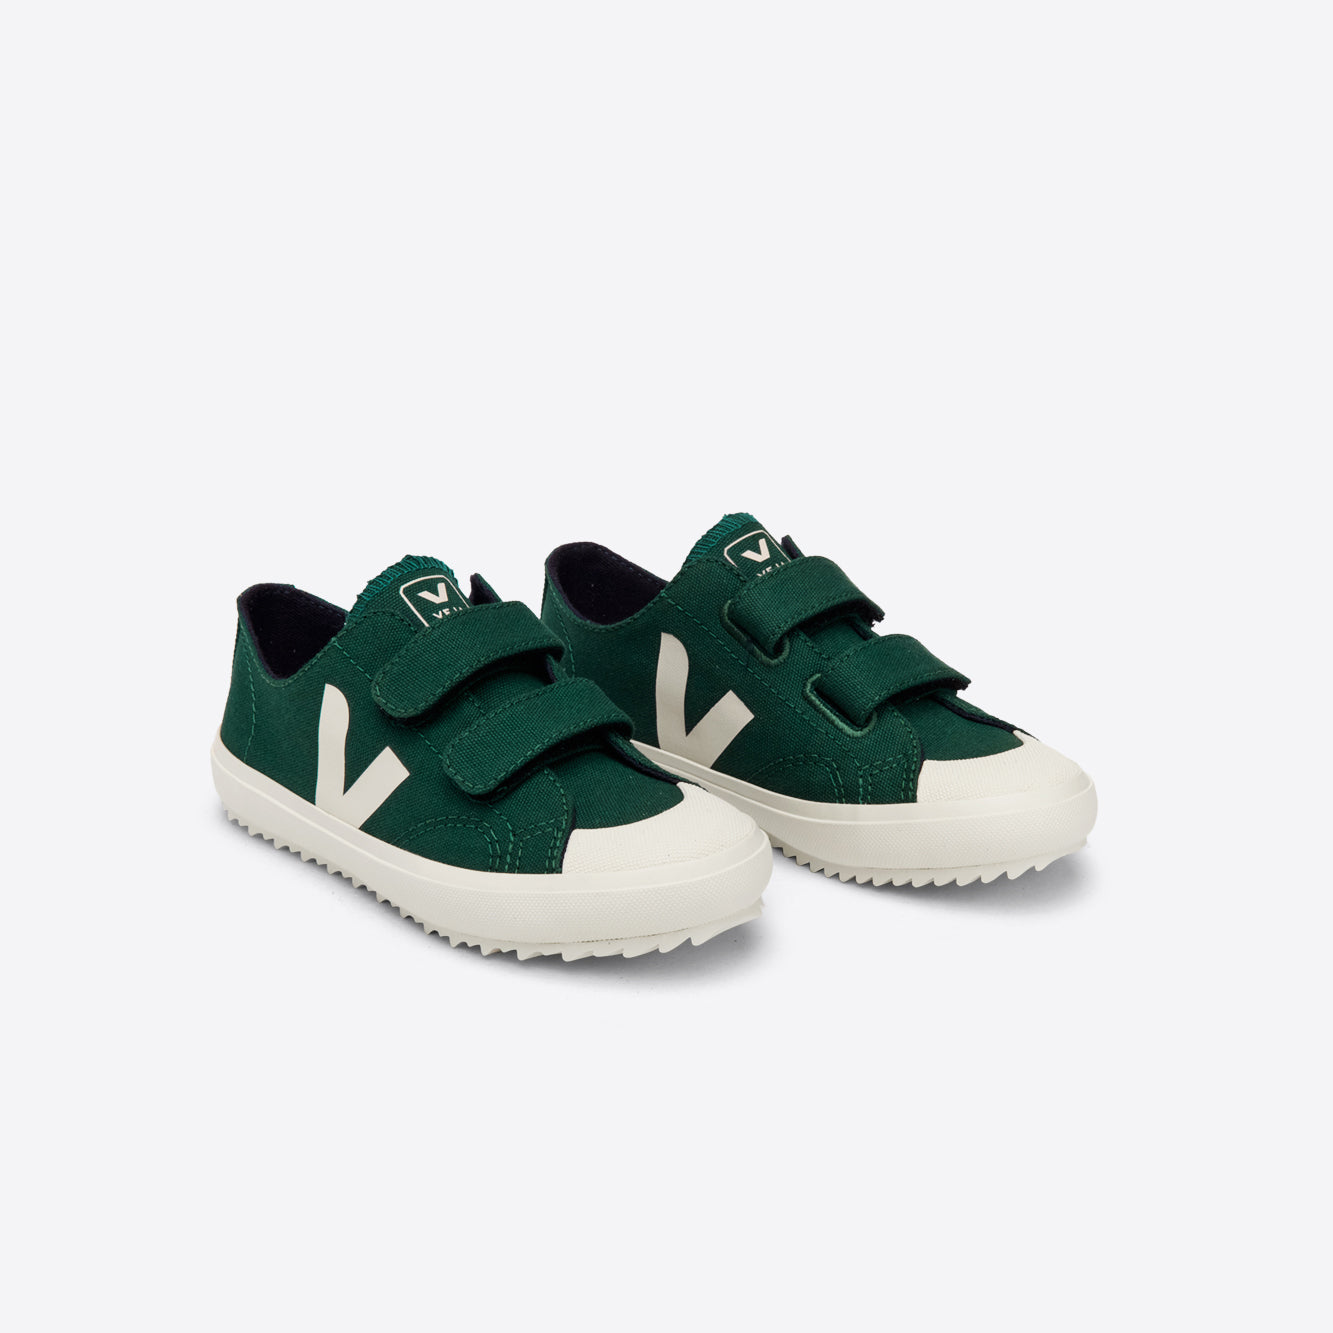 Boys & Girls Green "SMALL OLLIE CANVAS" Shoes